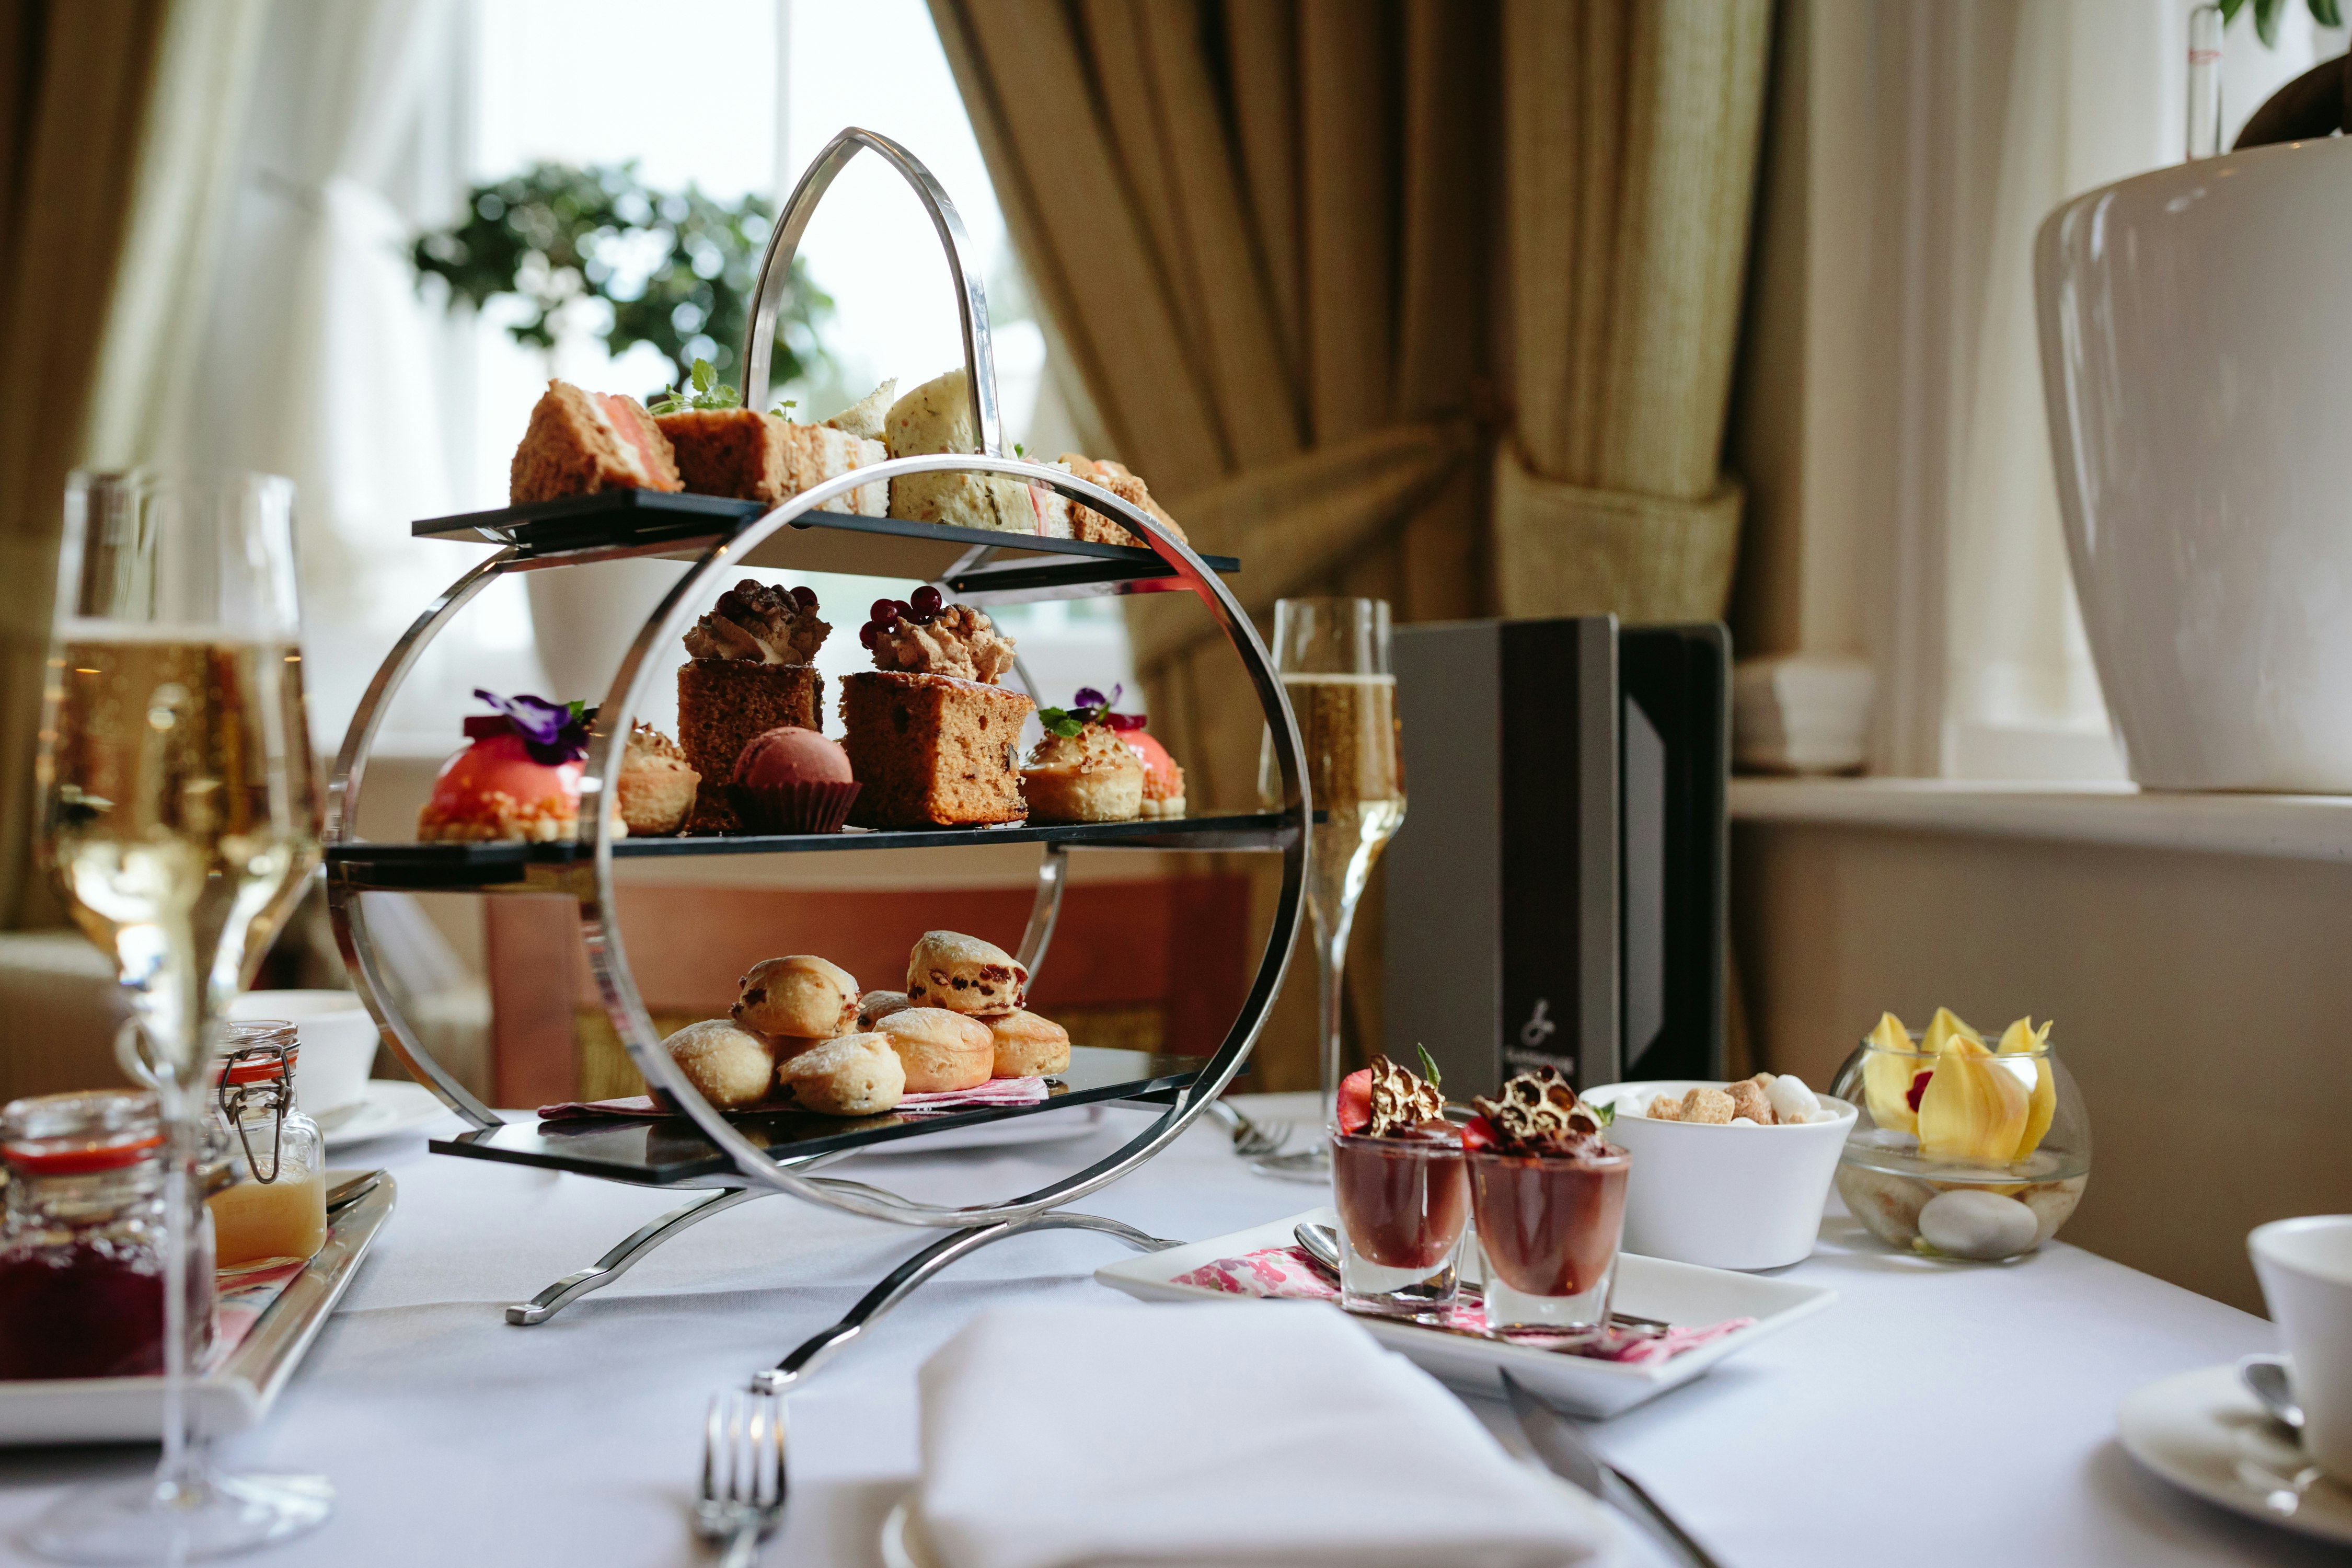 A cake stand filled with cakes, scones and strawberries. Two glasses of fizz.